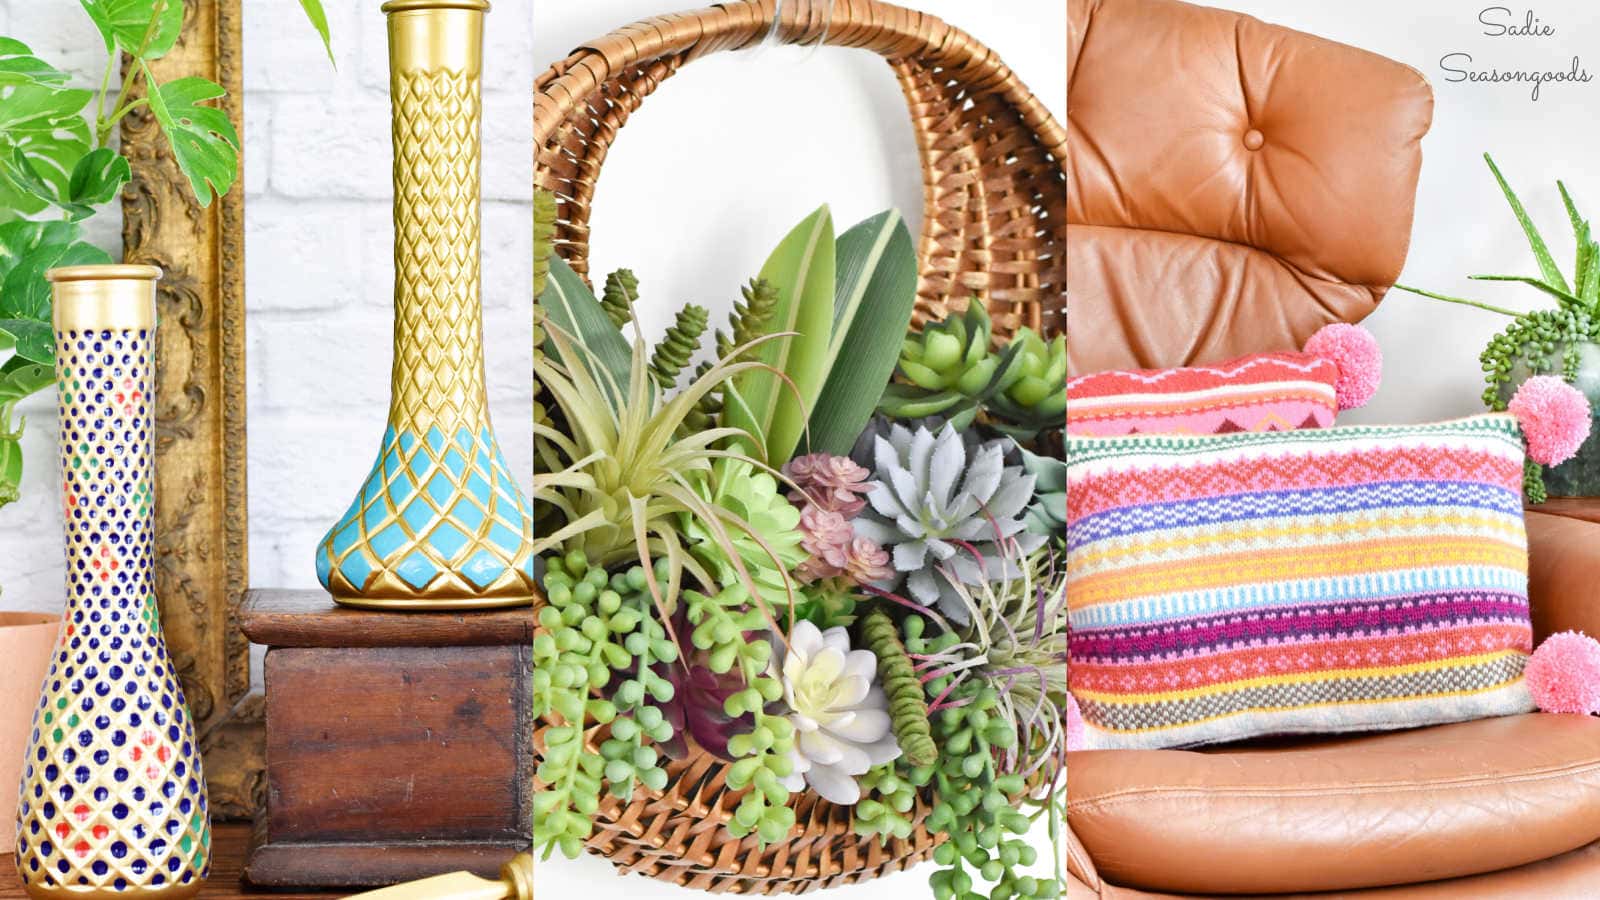 boho decor from thrift store finds